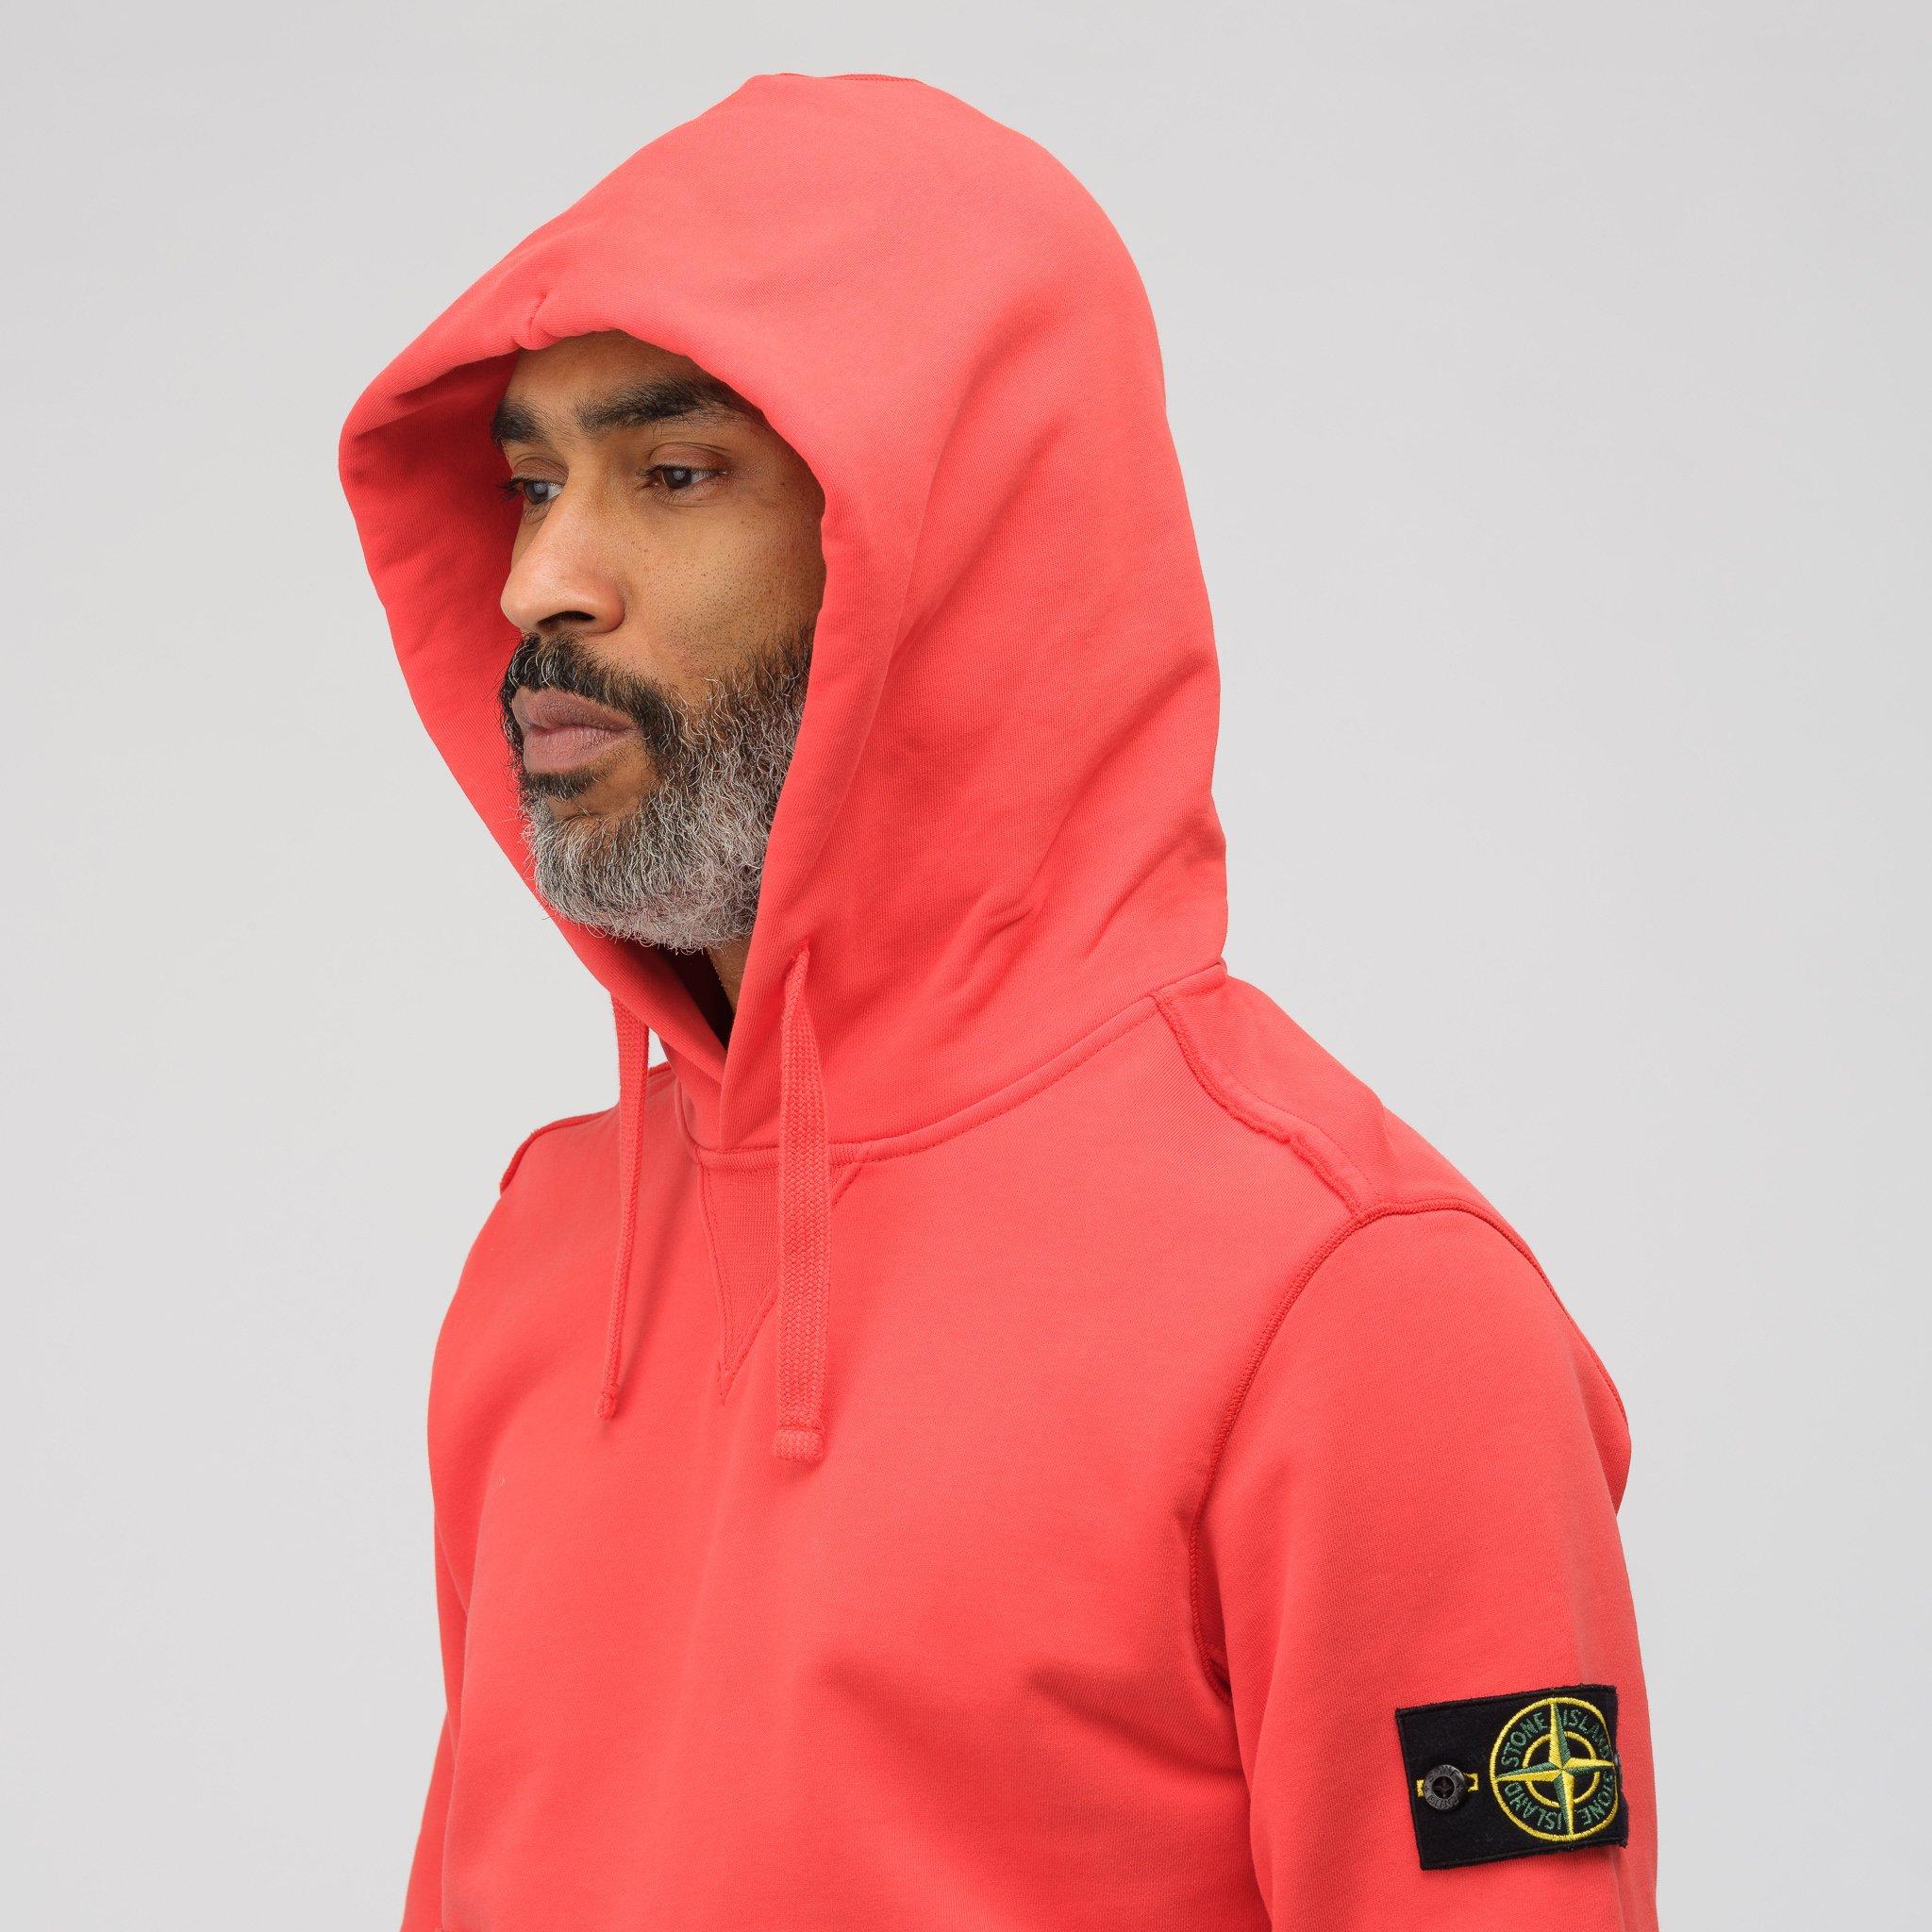 Stone Island Cotton 62851 Pullover Hoodie In Red Orange for Men - Lyst